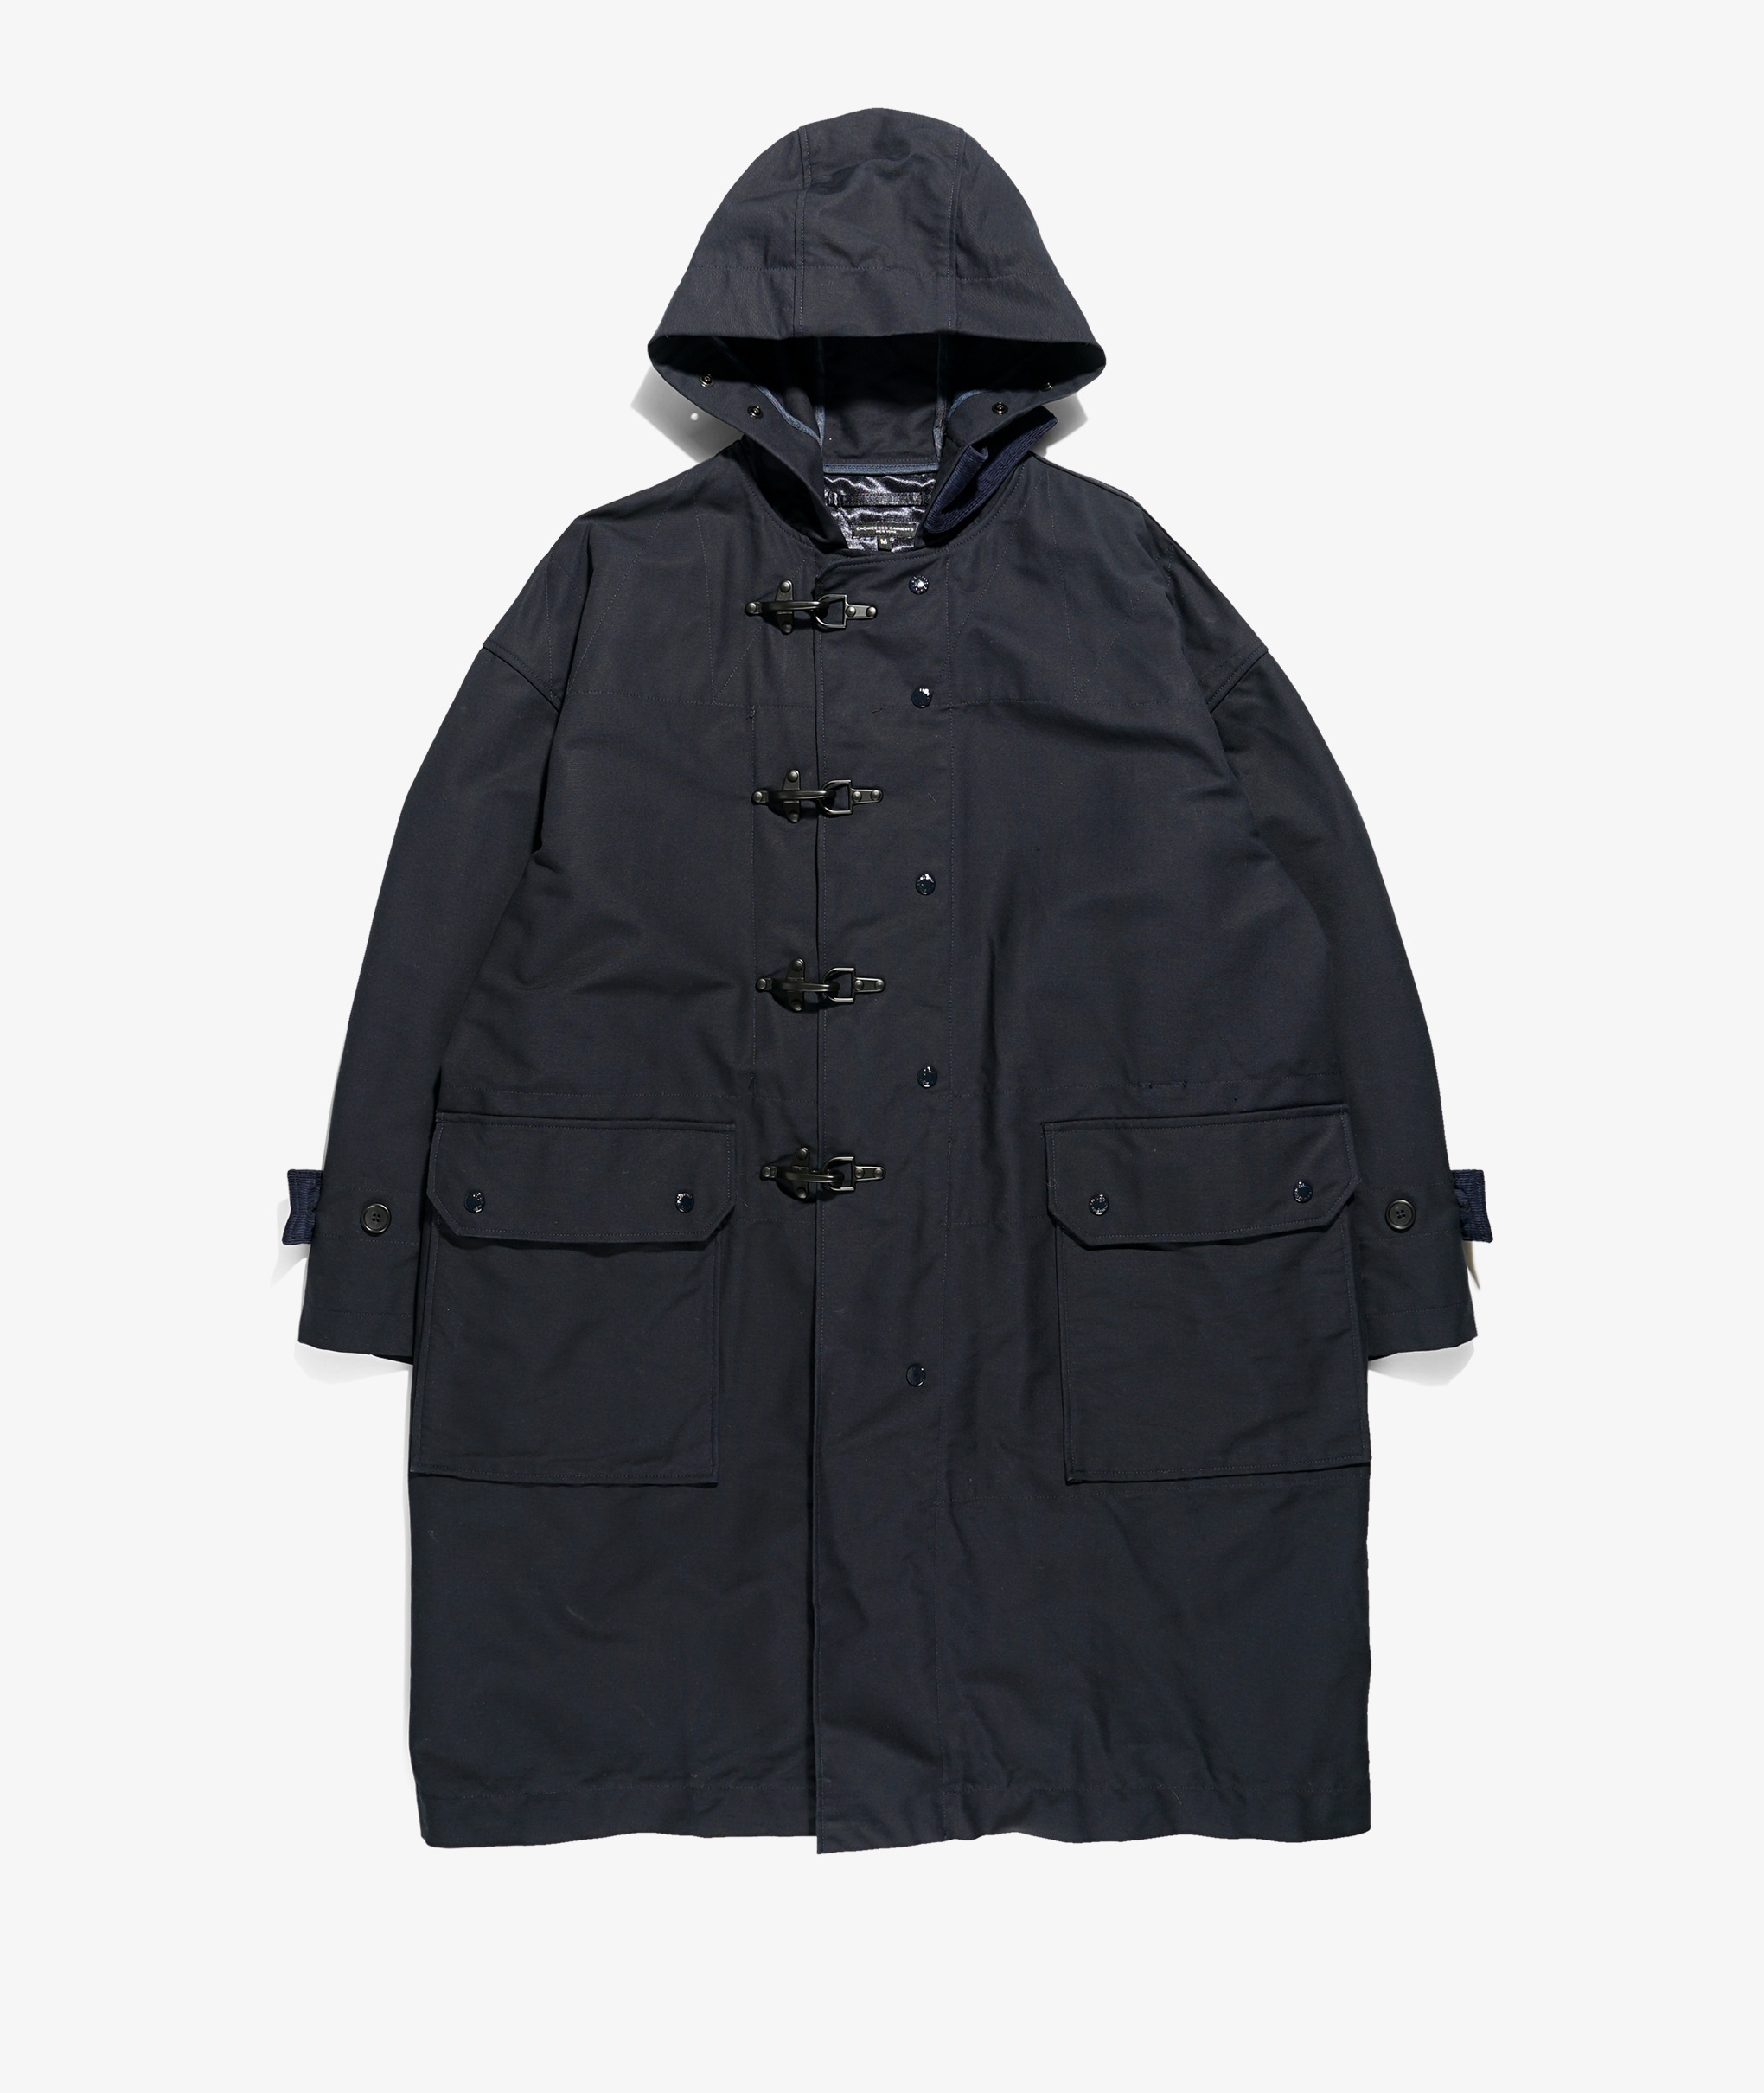 Norse Store | Shipping Worldwide - Engineered Garments Double